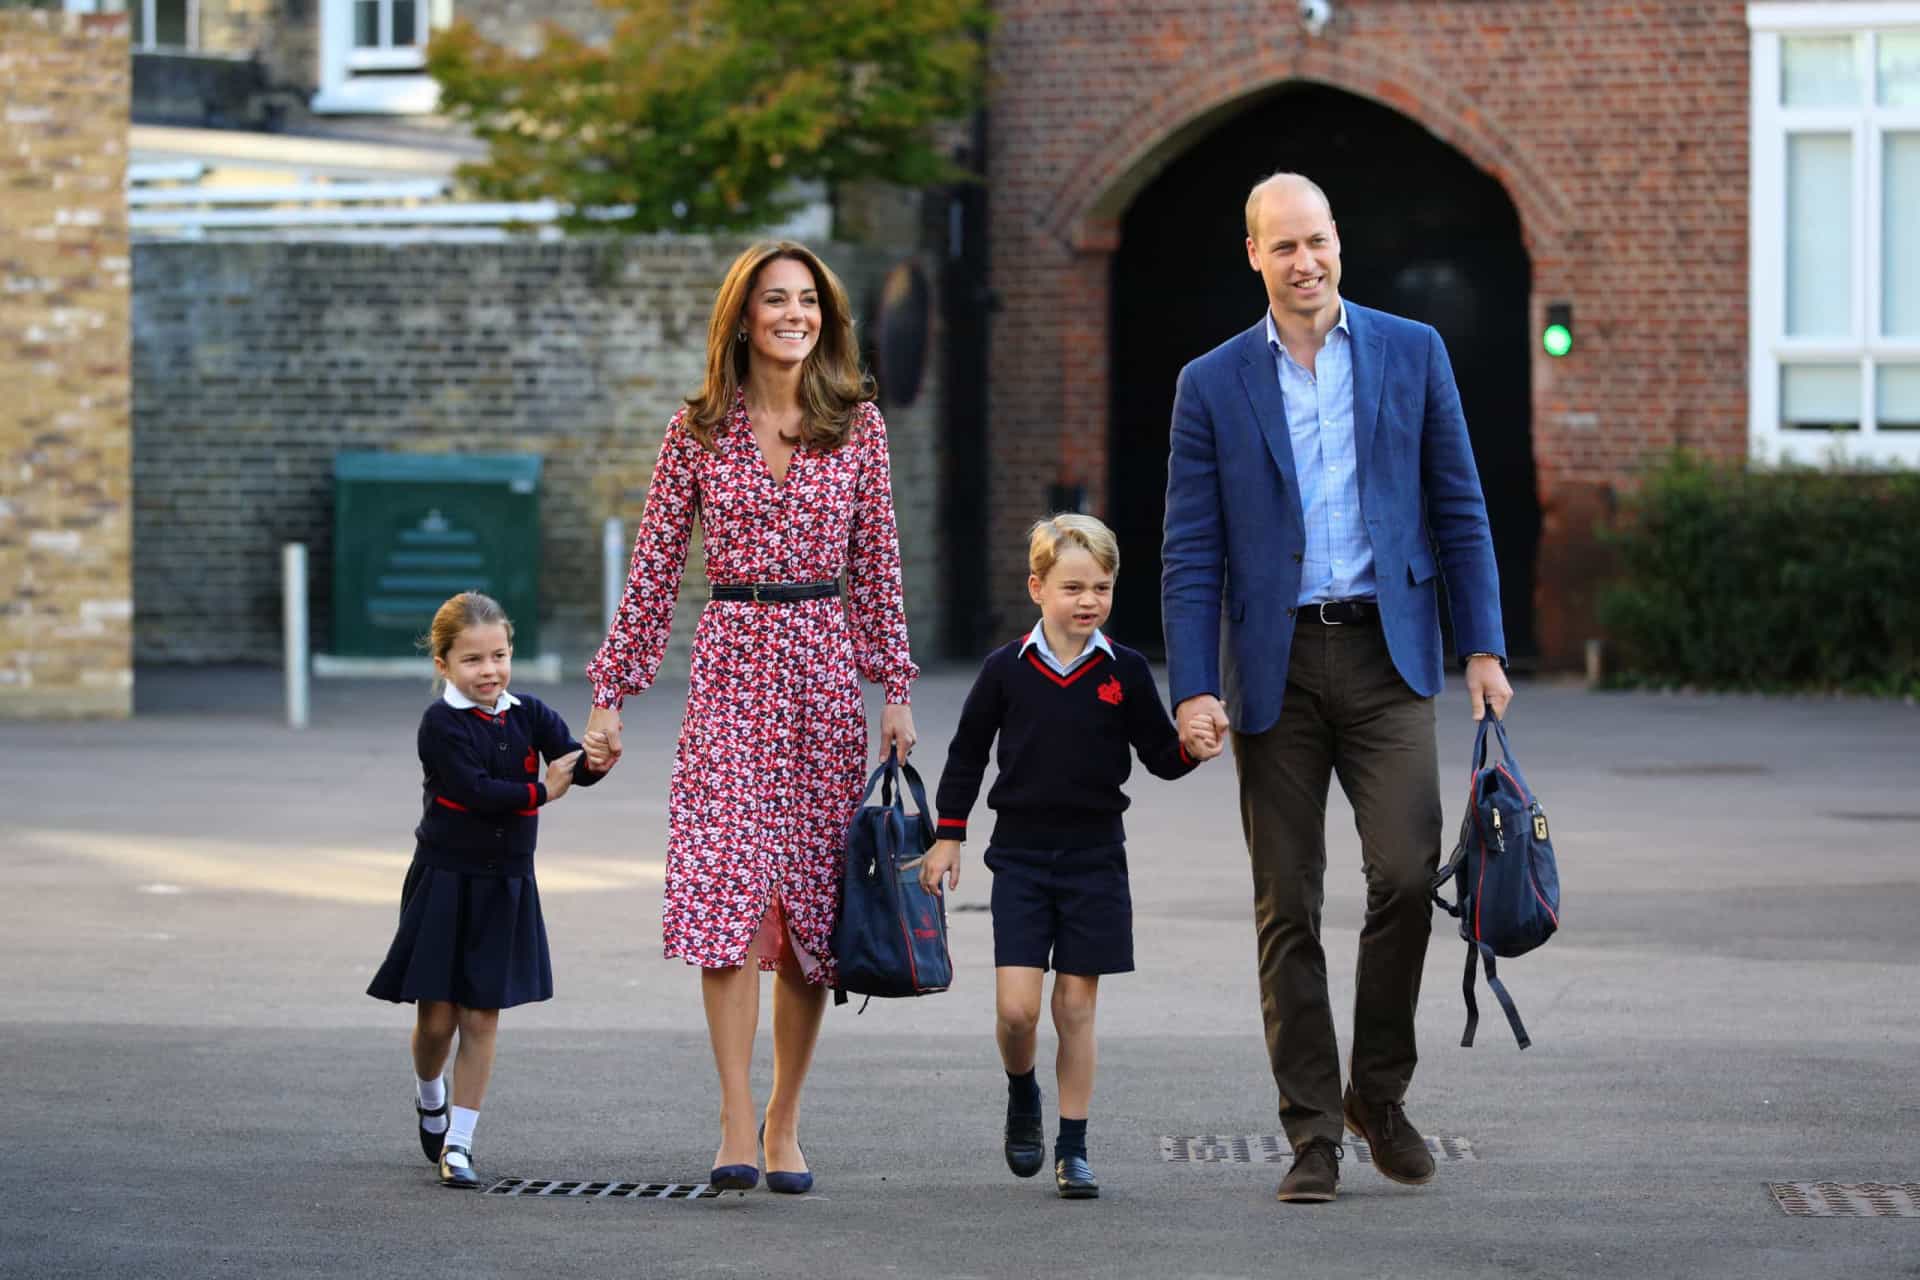 <p>Princess Charlotte arrives for her first day at Thomas's Battersea Prep School in London, England, with her brother Prince George and parents the Duke and Duchess of Cambridge on September 5, 2019.</p>